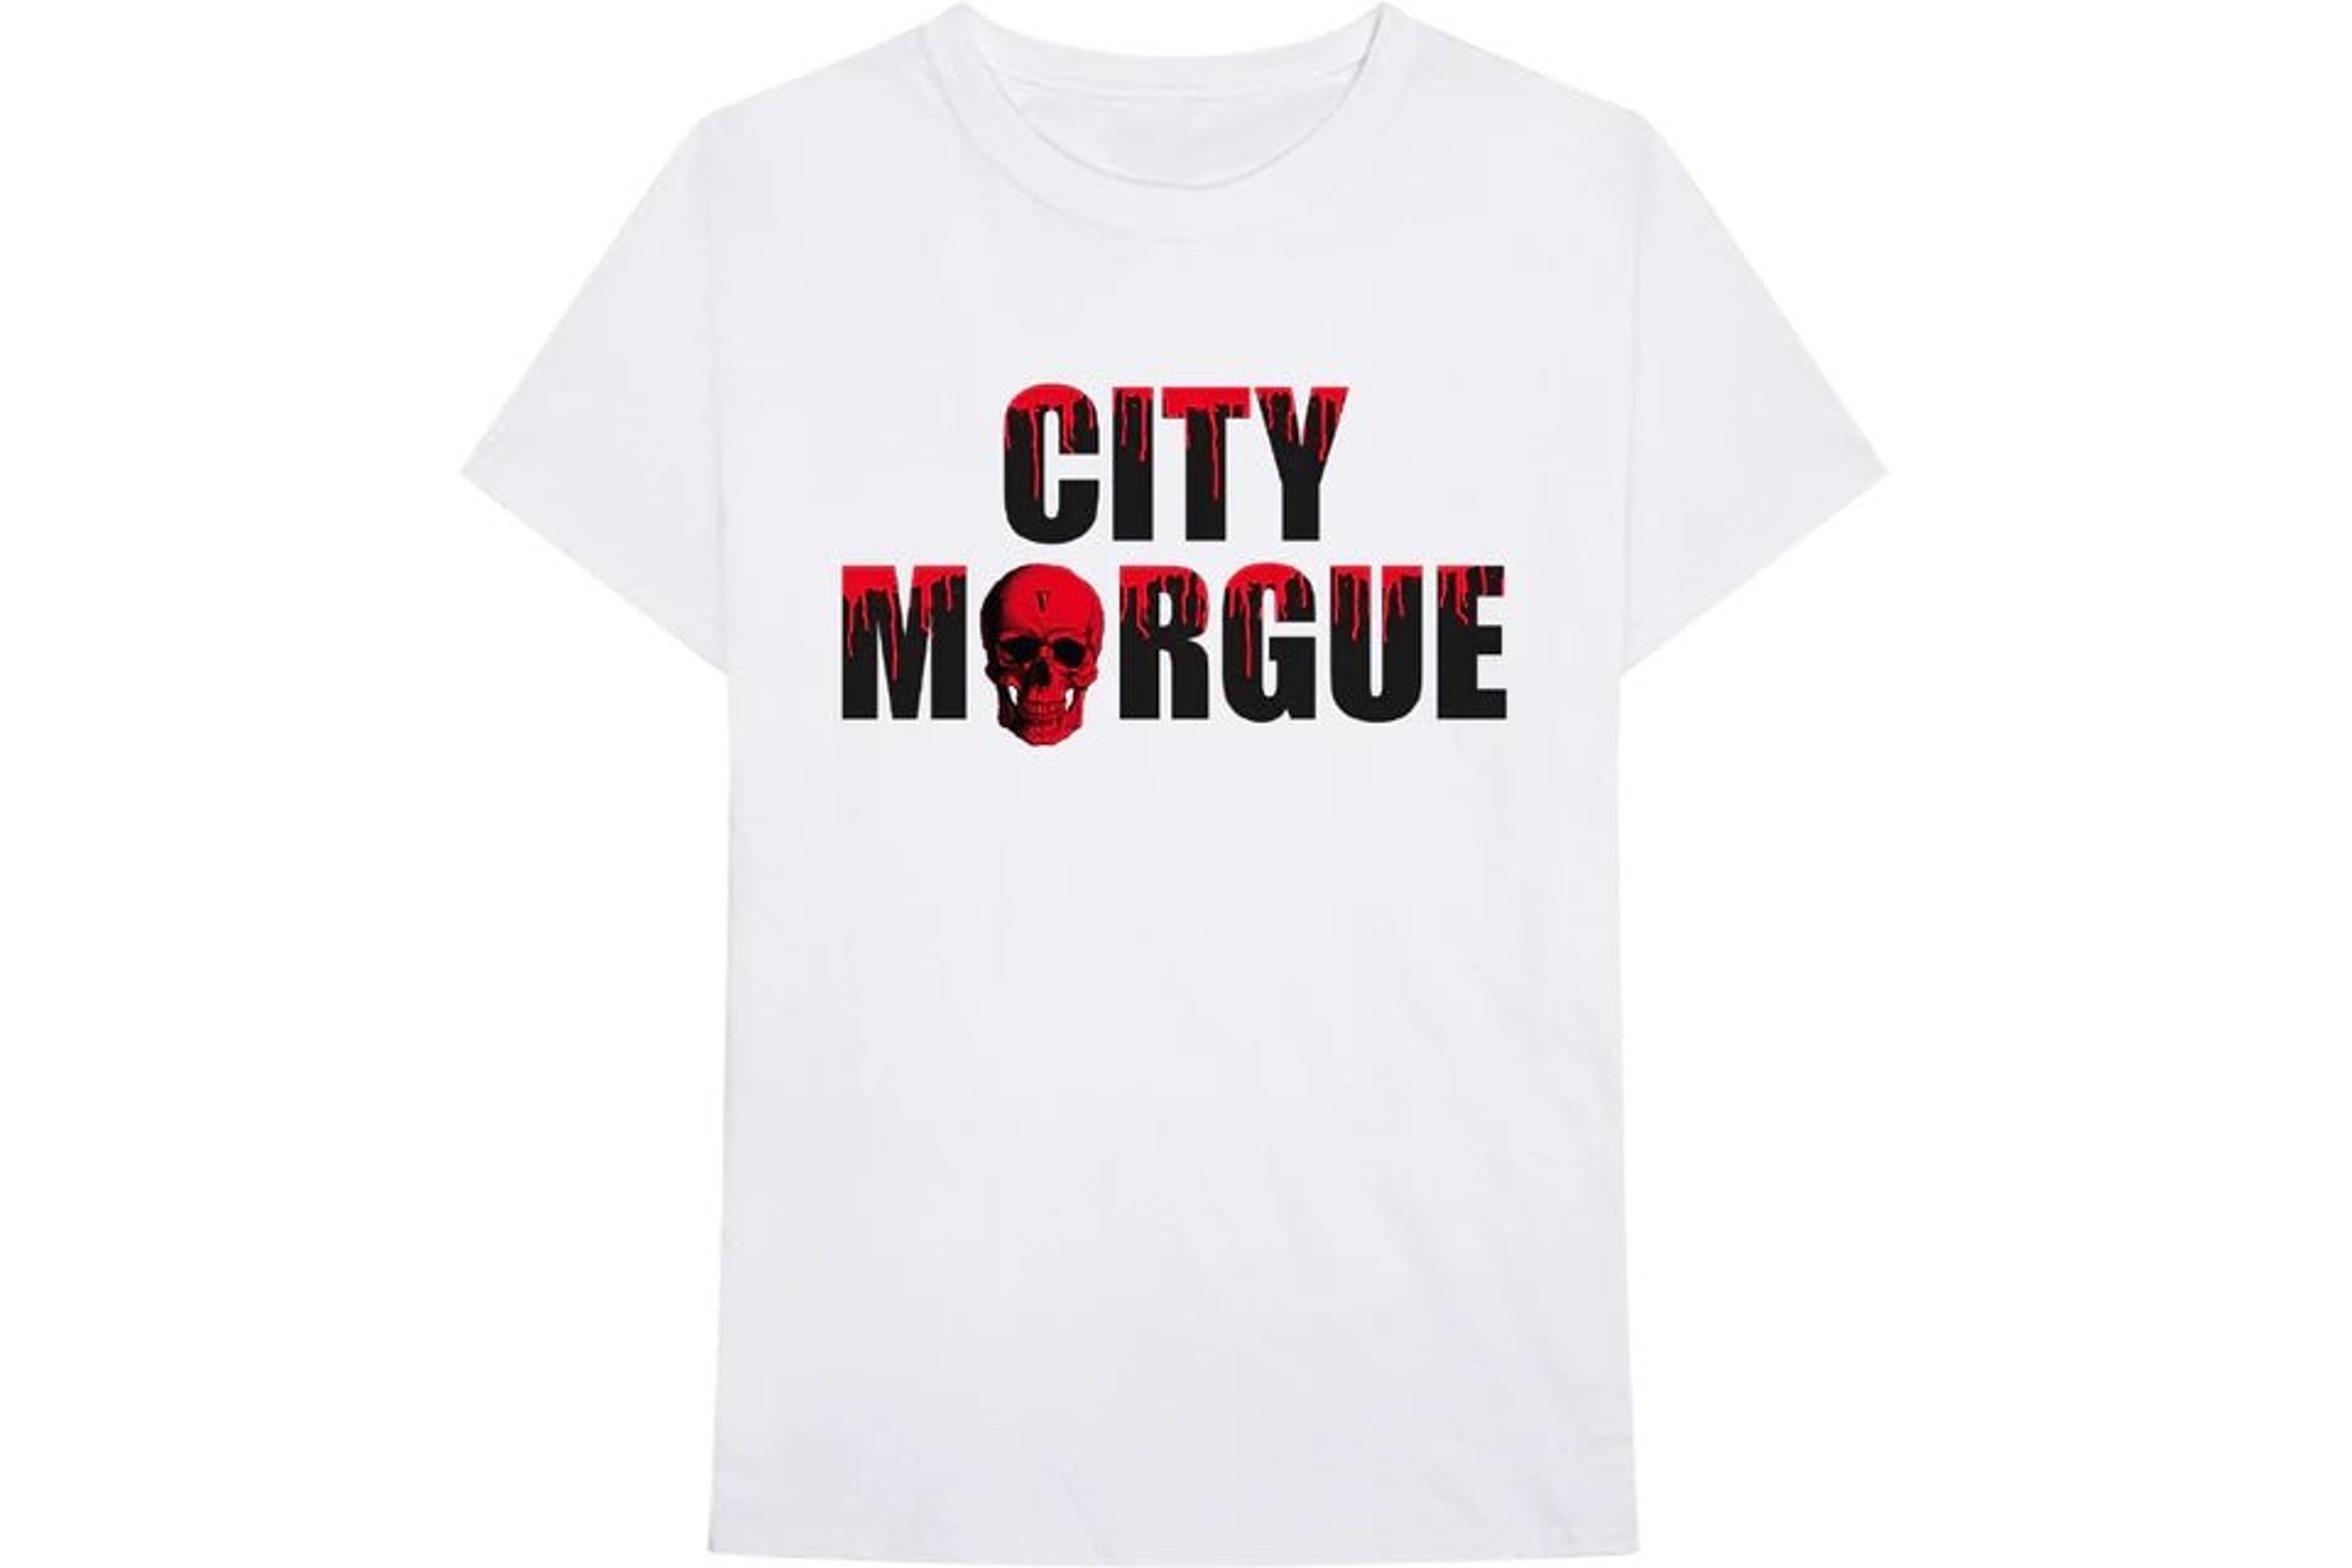 Alternate View 1 of Vlone x City Morgue Dogs Tee White